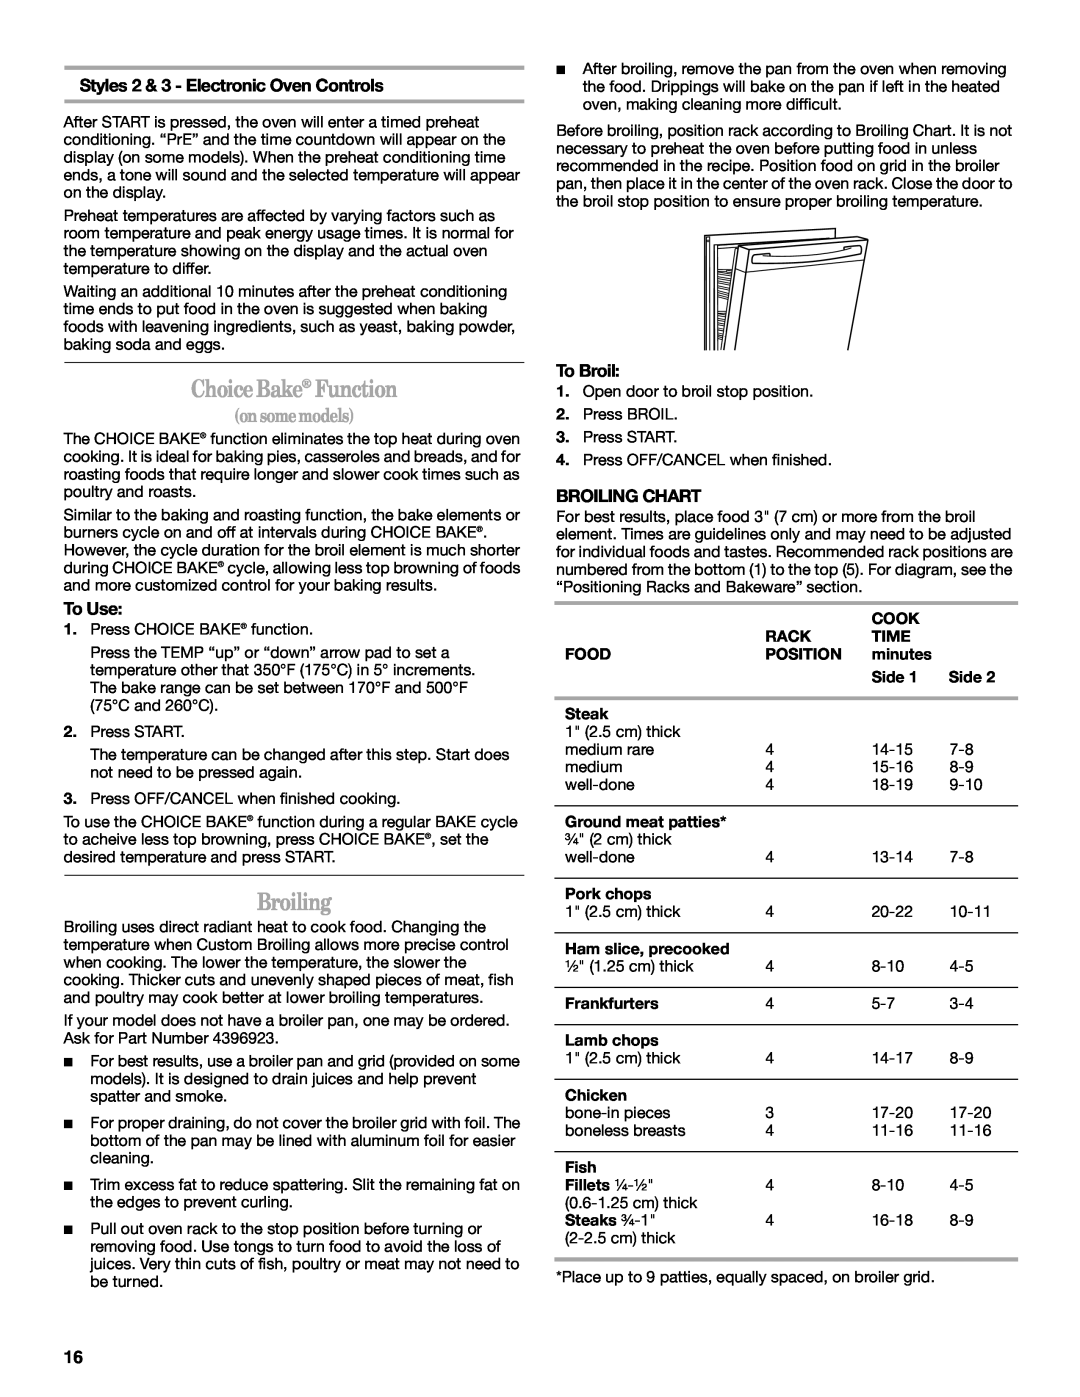 Whirlpool 9761862 ChoiceBake Function, To Broil, Broiling Chart, onsomemodels, Styles 2 & 3 - Electronic Oven Controls 